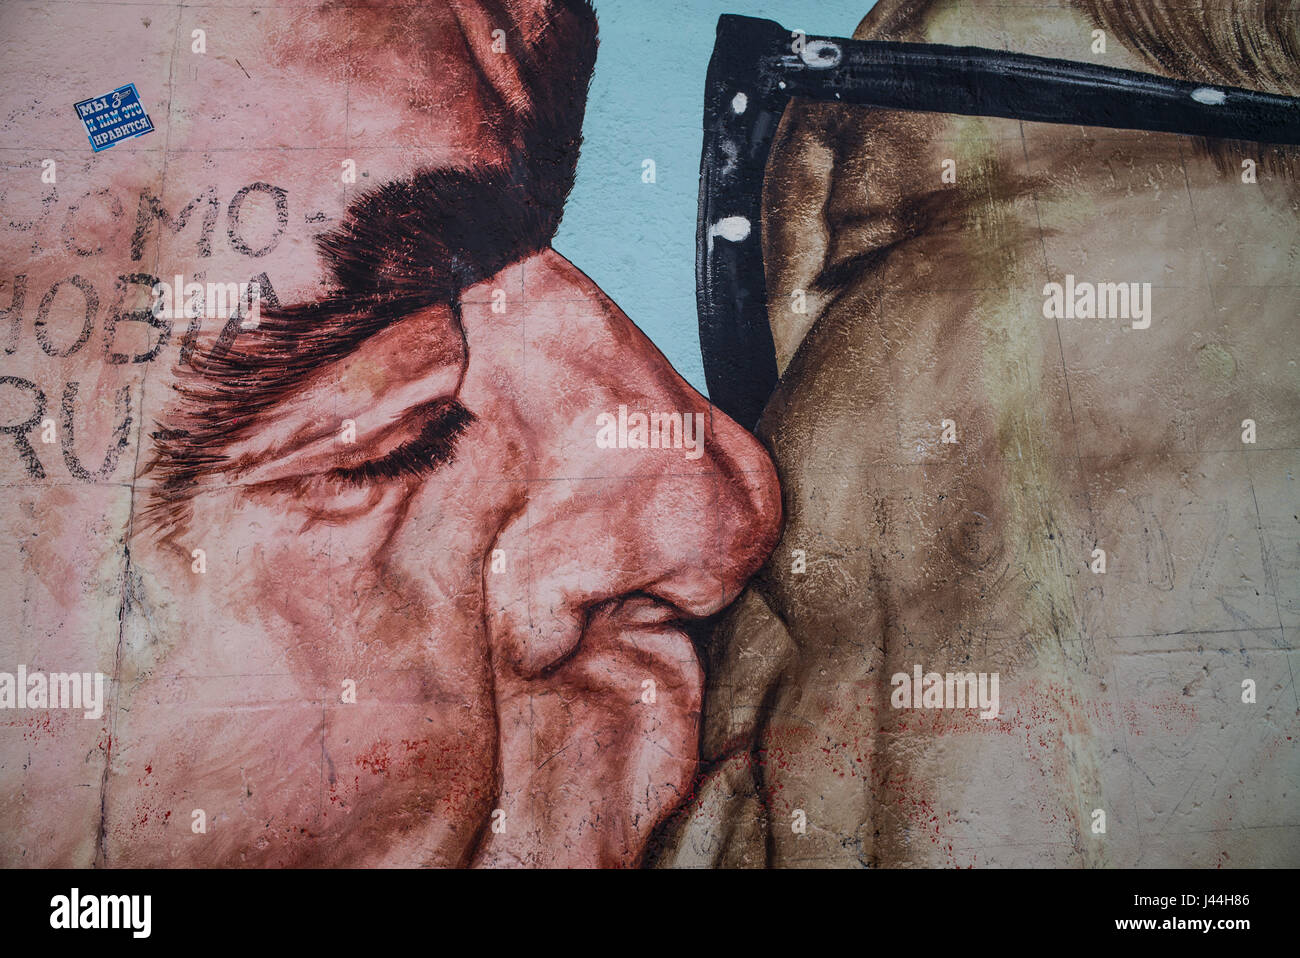 'The Kiss' depicting Soviet leader Leonid Brezhnev and East German President Erich Honecker in a fraternal embrace painted on the Berlin Wall. Stock Photo